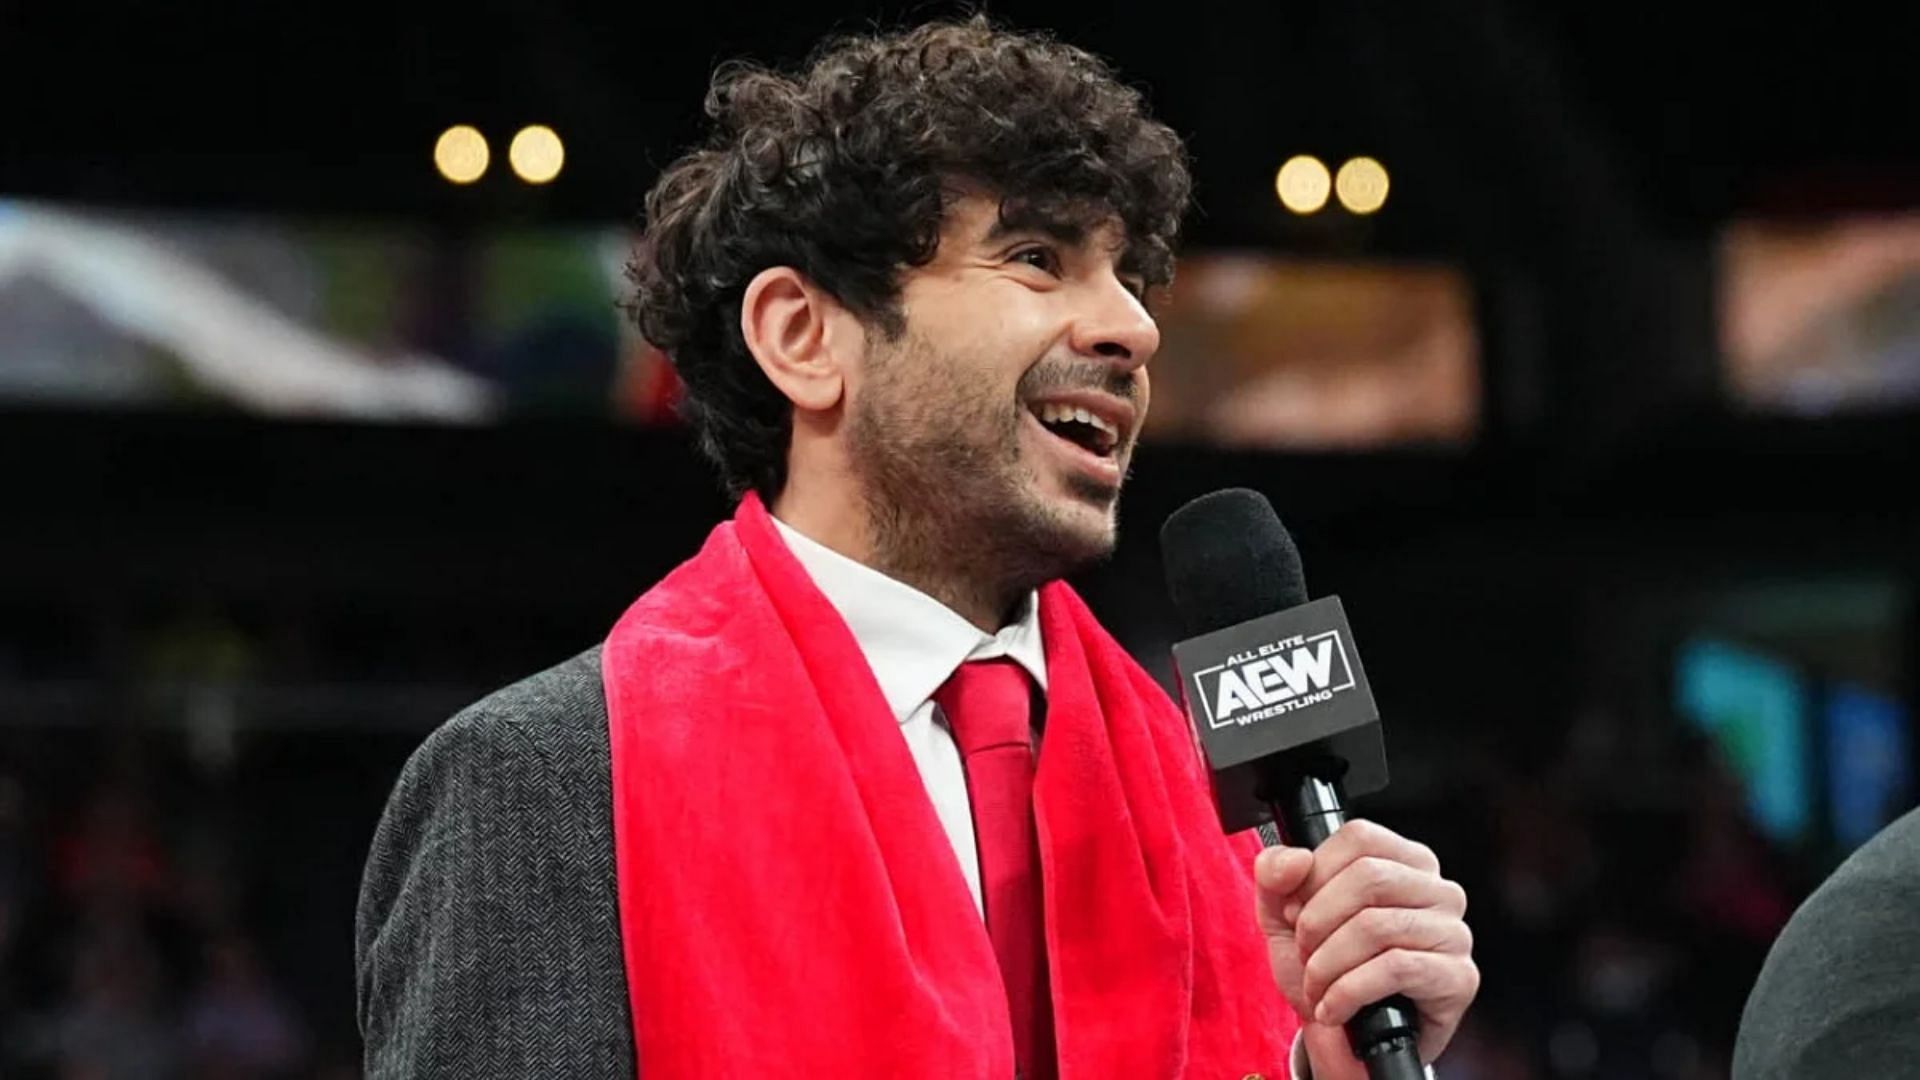 Will Tony Khan beat WWE to signing this star?